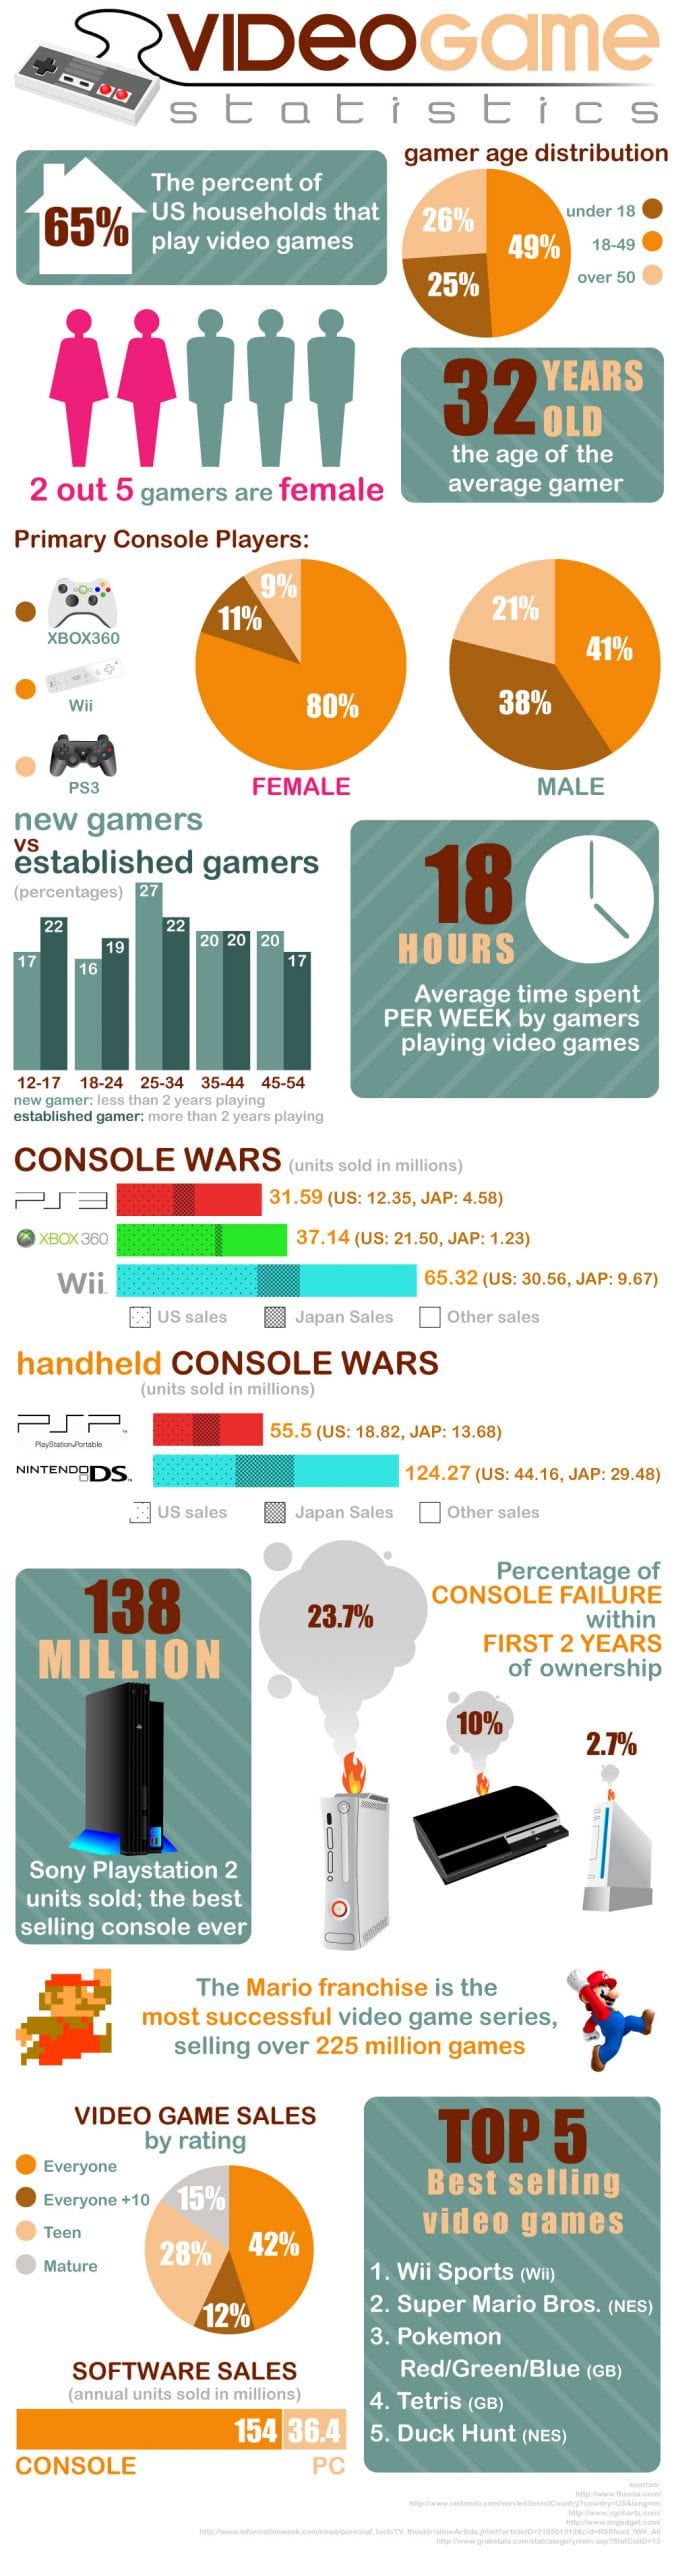 Video Games by the Numbers